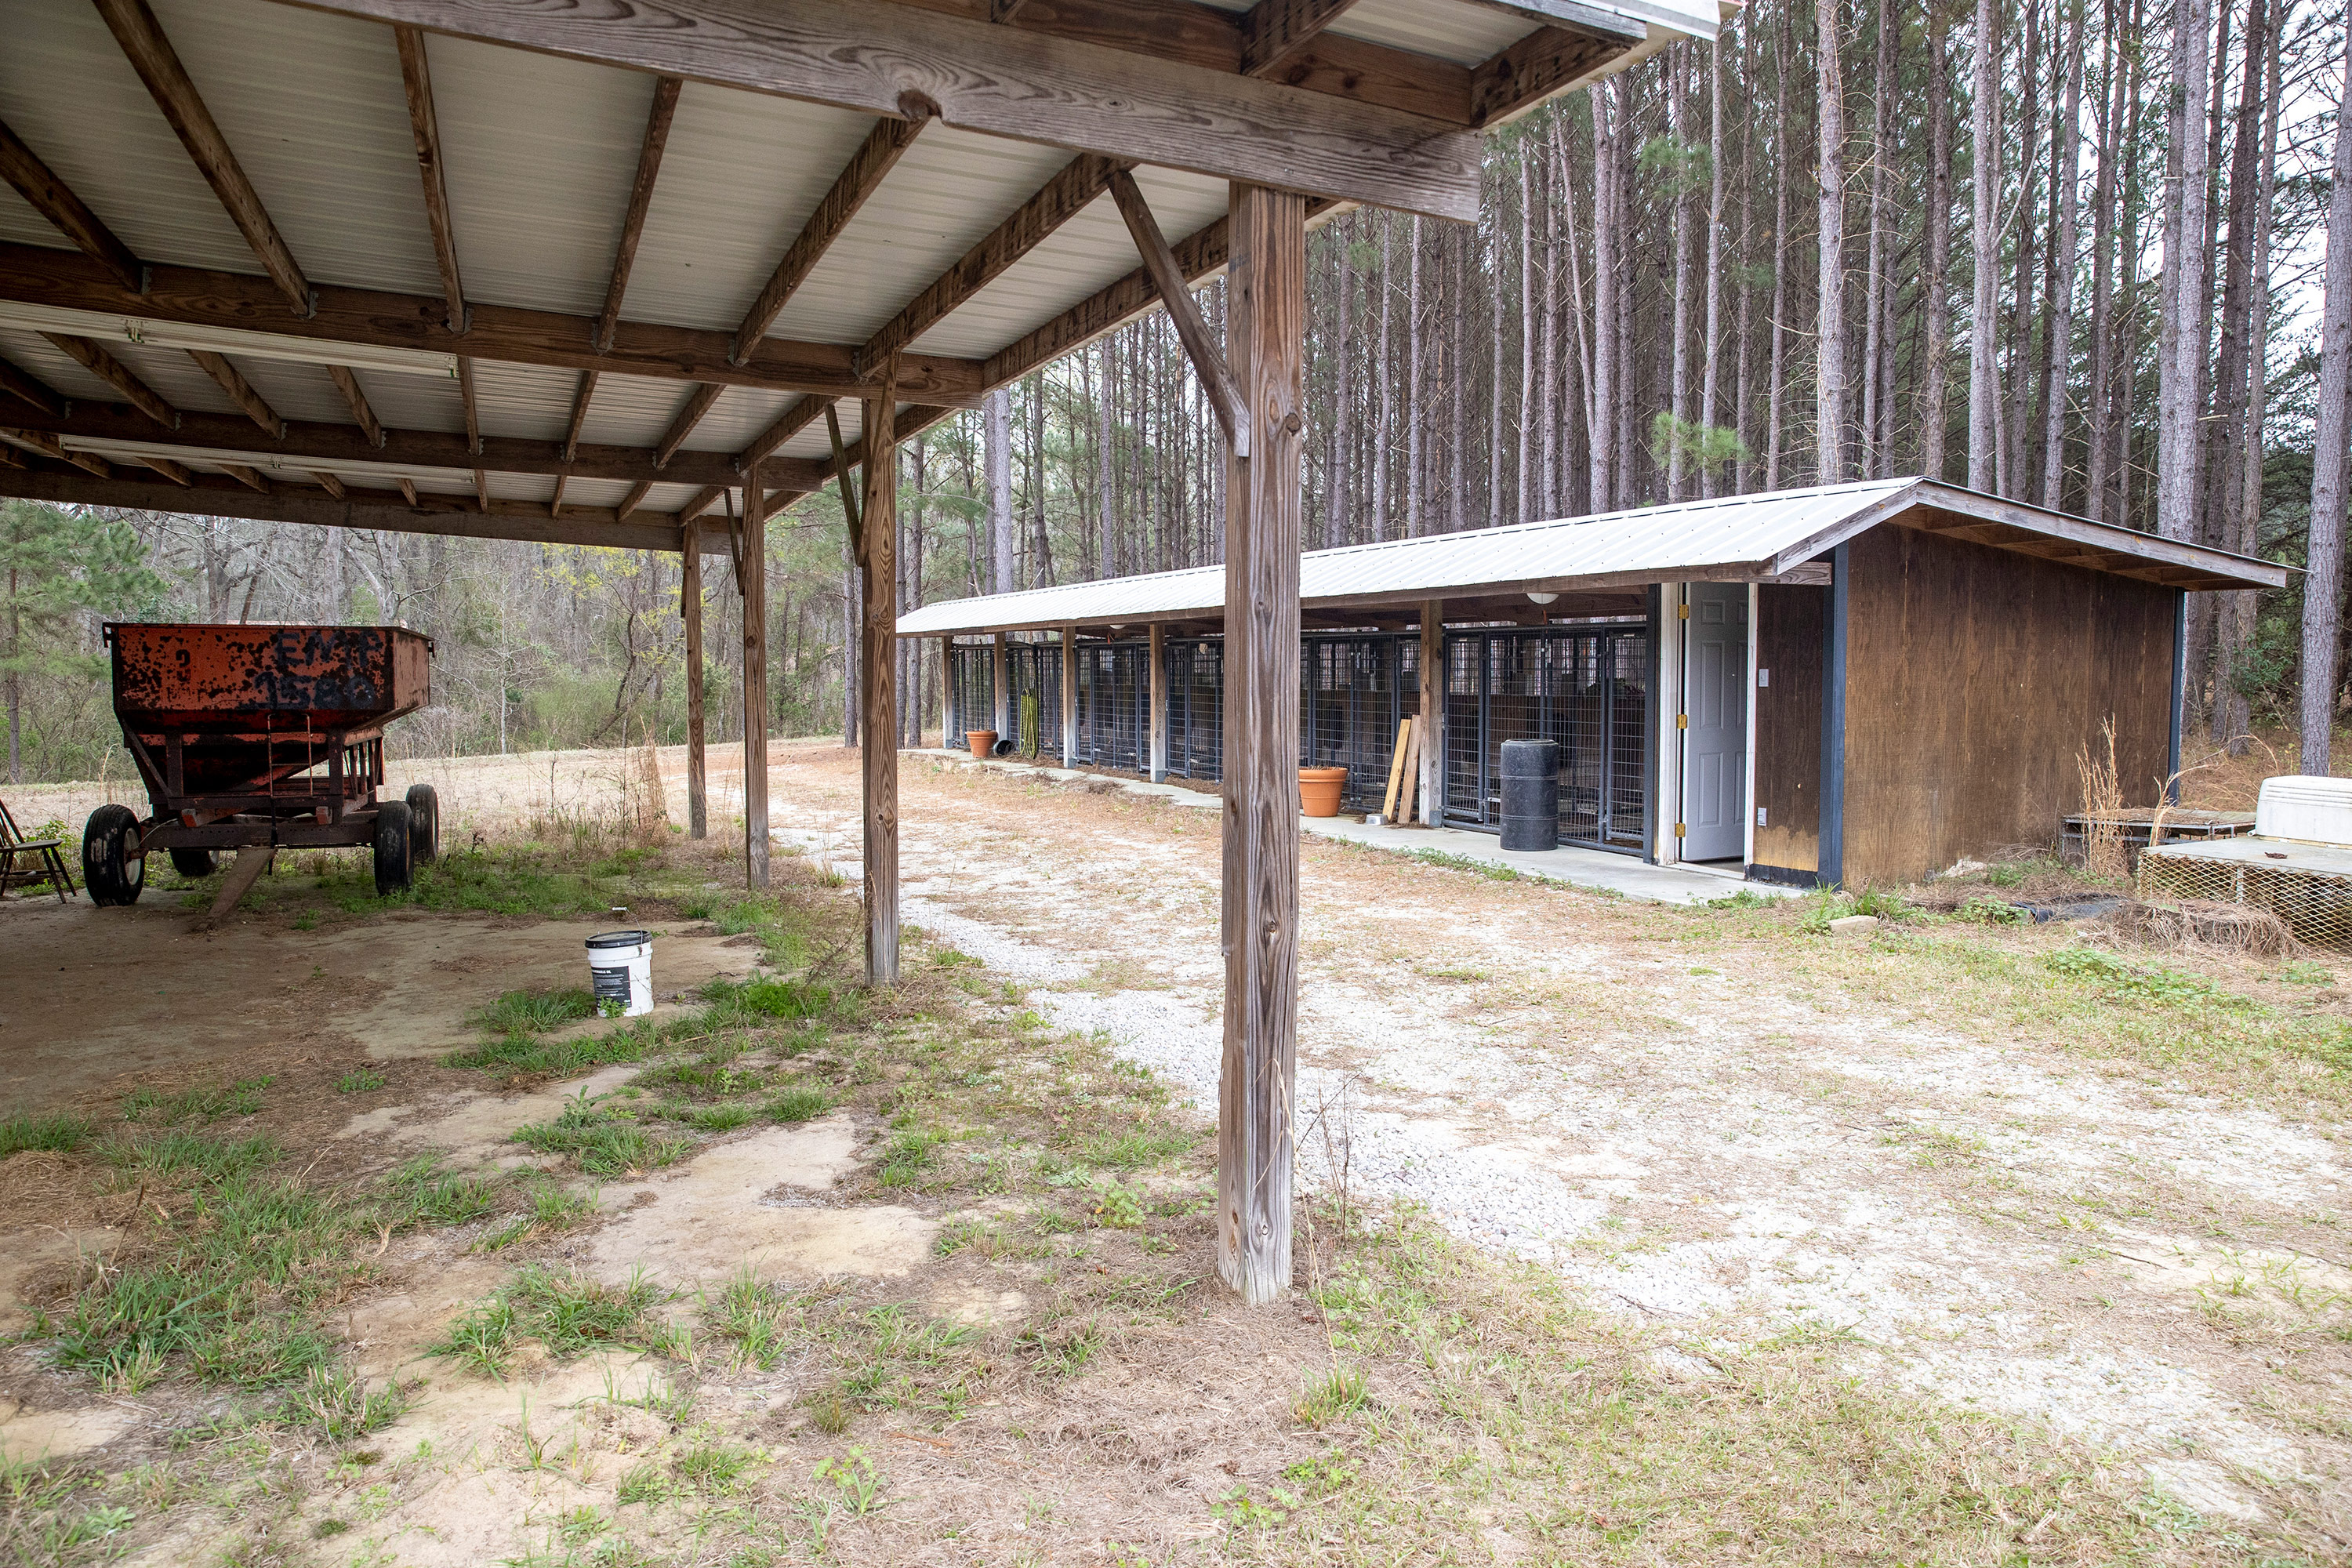 The hanger and kennels where Paul and Maggie's bodies were found on the Murdaugh's Moselle property in Islandton, South Carolina. 